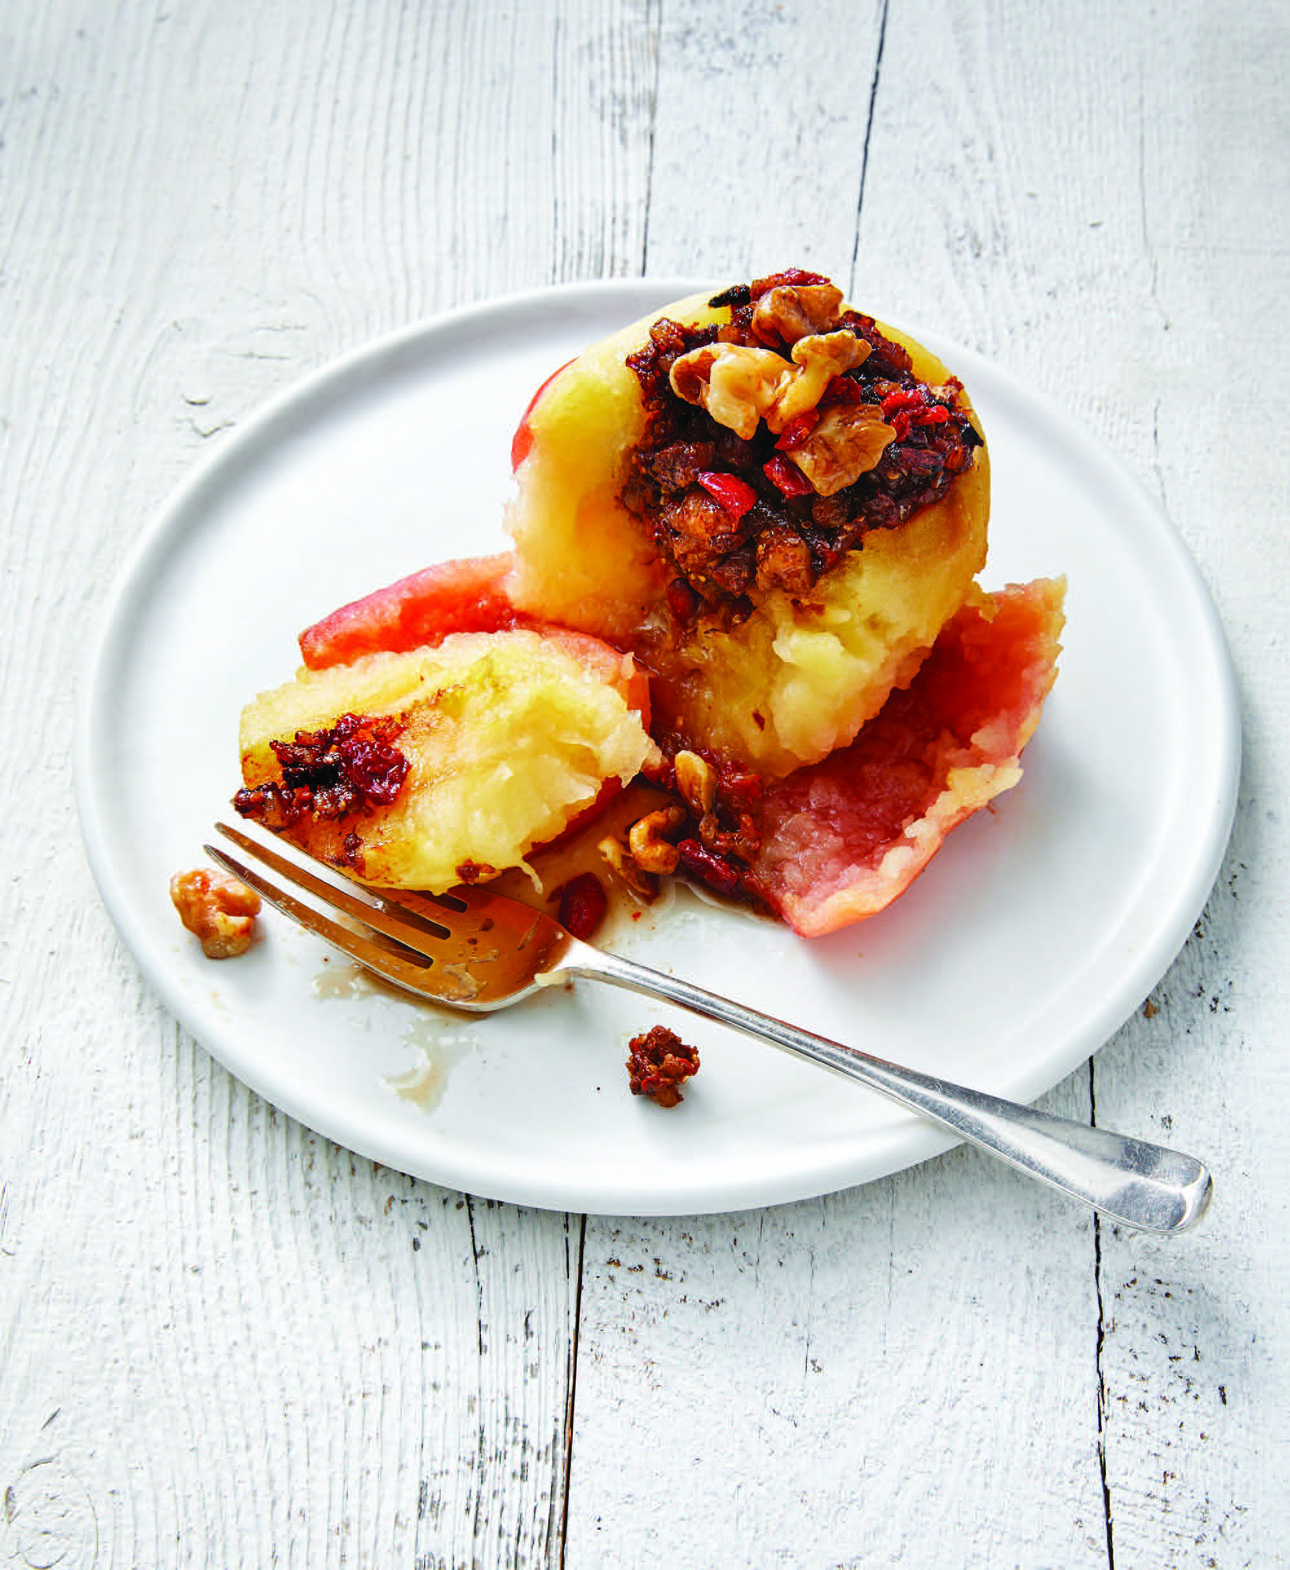 Baked Apples with Walnuts and Goji Berries